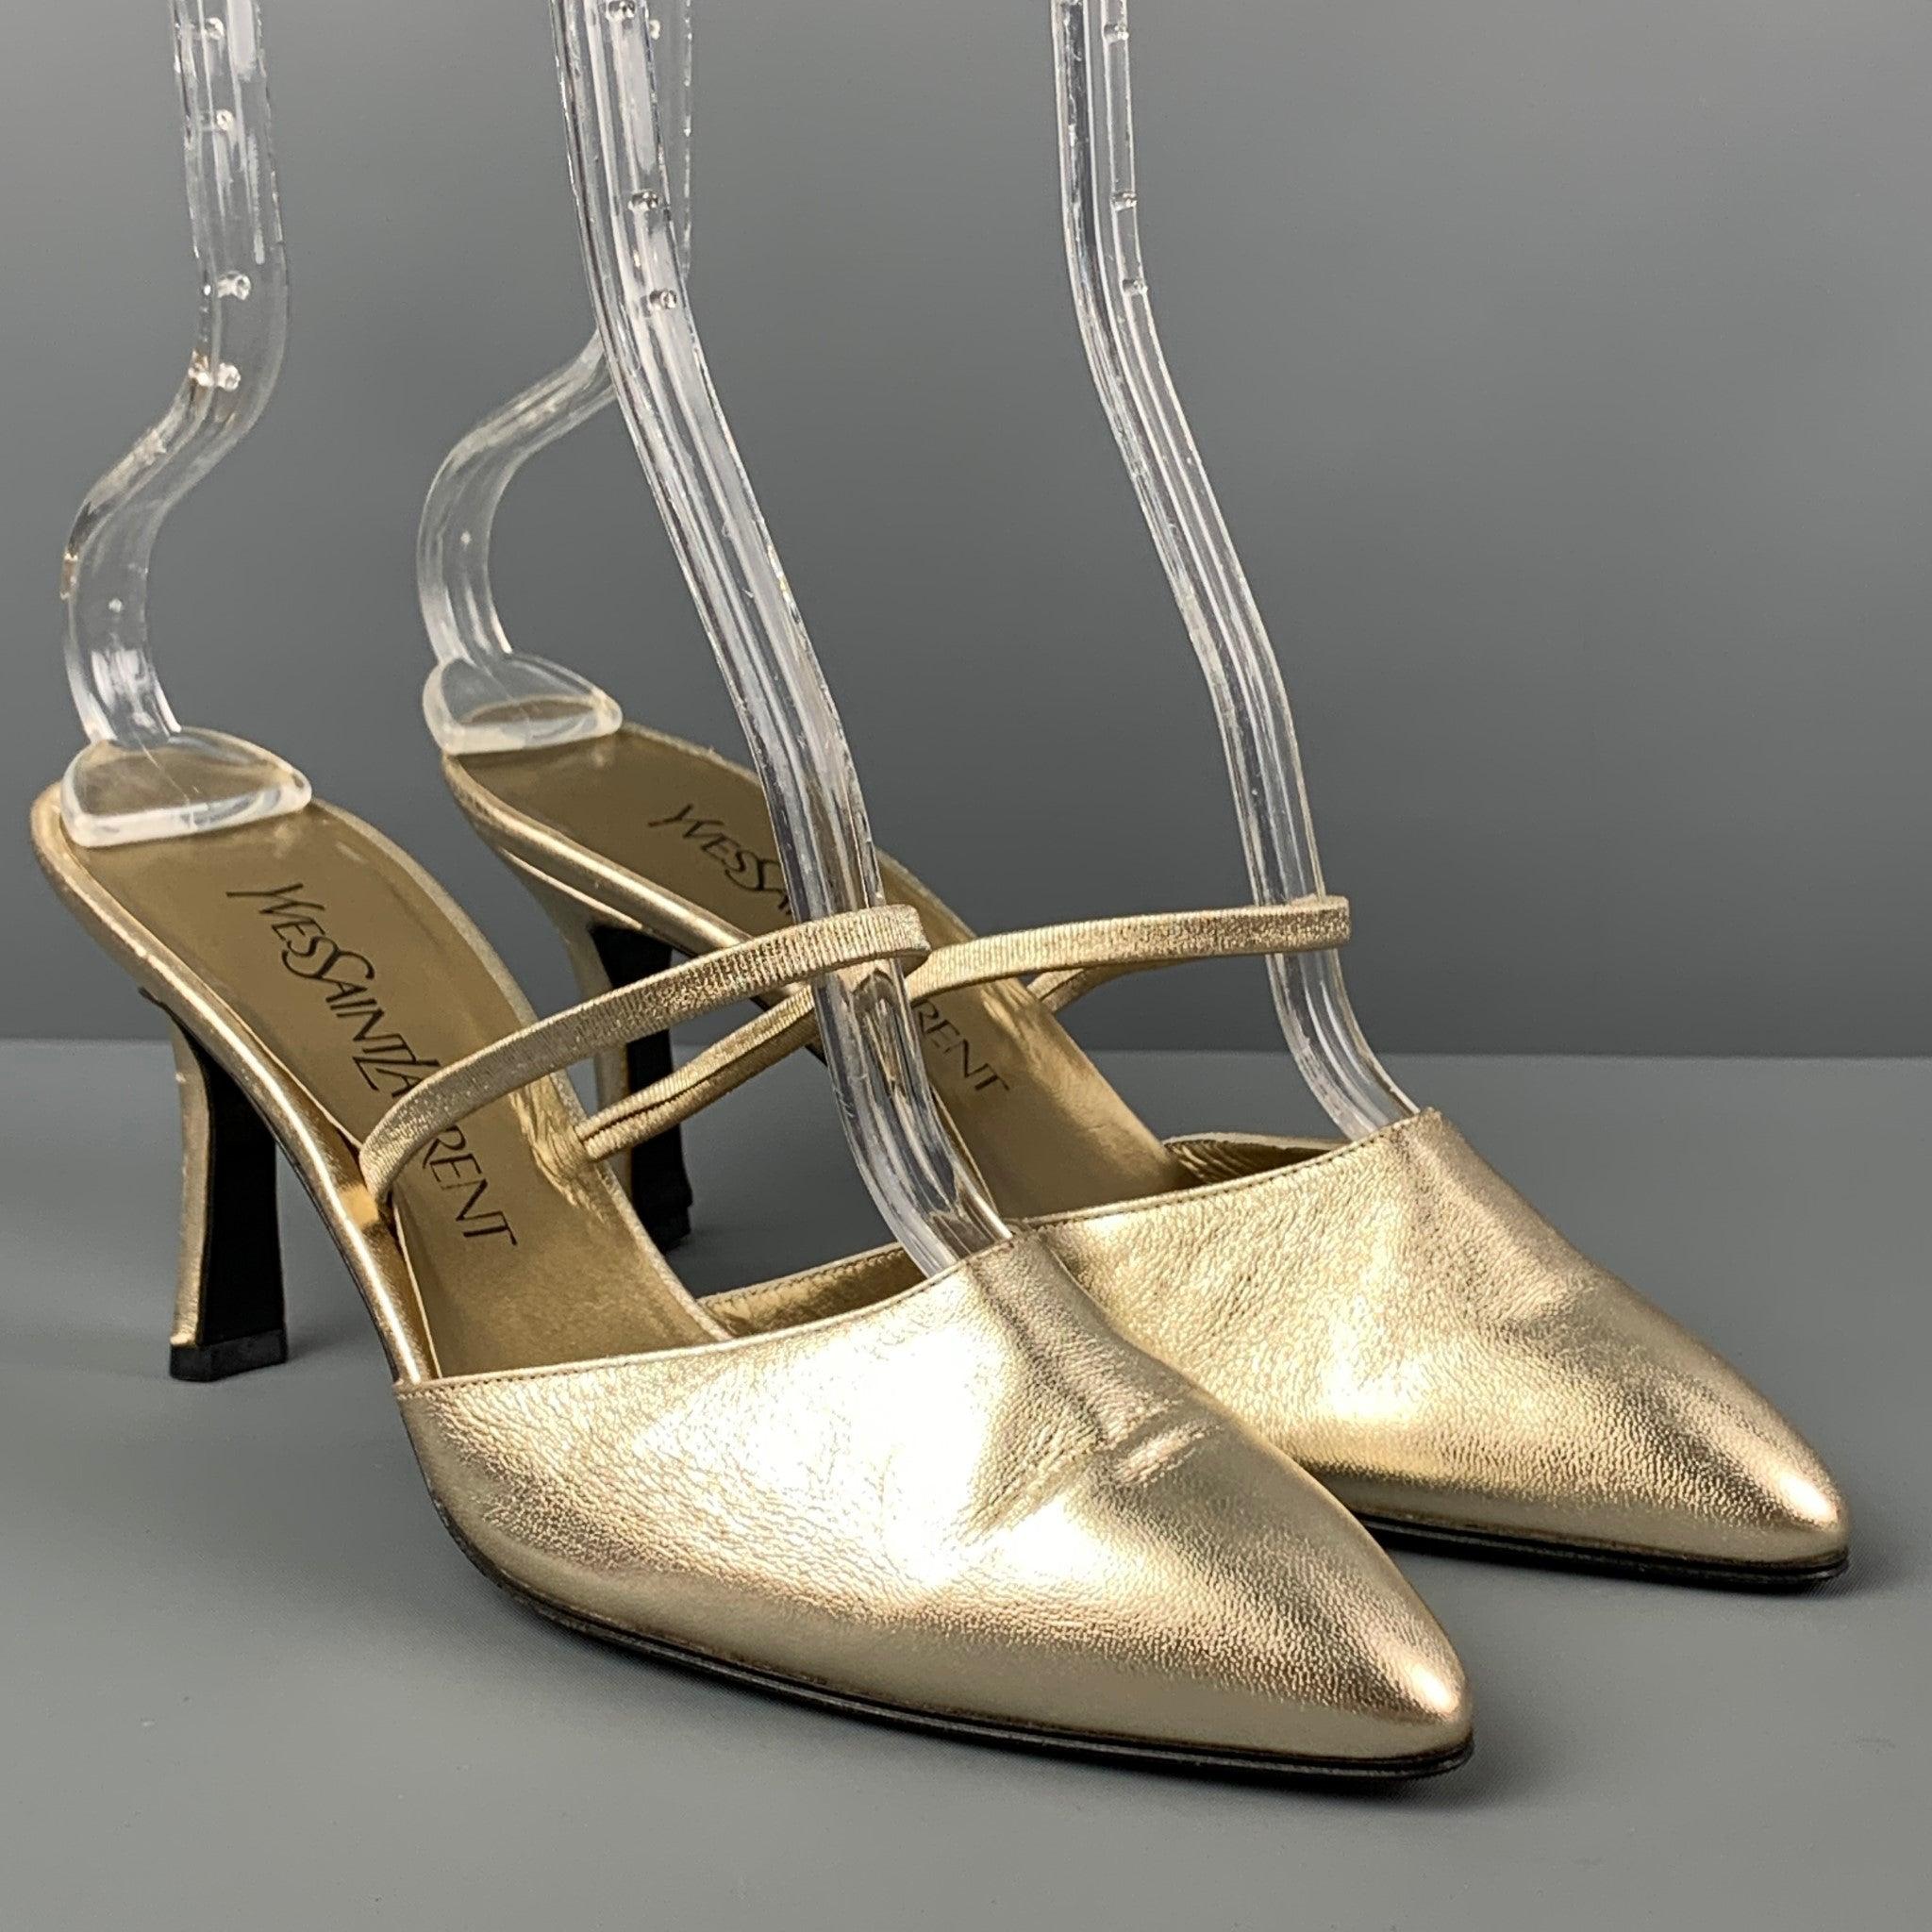 Vintage YVES SAINT LAURENT heels comes in a gold metallic leather featuring a pointed toe, open back style, and a stacked heel. Made in Italy.
 Very Good
 Pre-Owned Condition. 
 

 Marked:  7.5 M  
 

 Measurements: 
  Heel: 3 inches 
  
  
  
 Sui